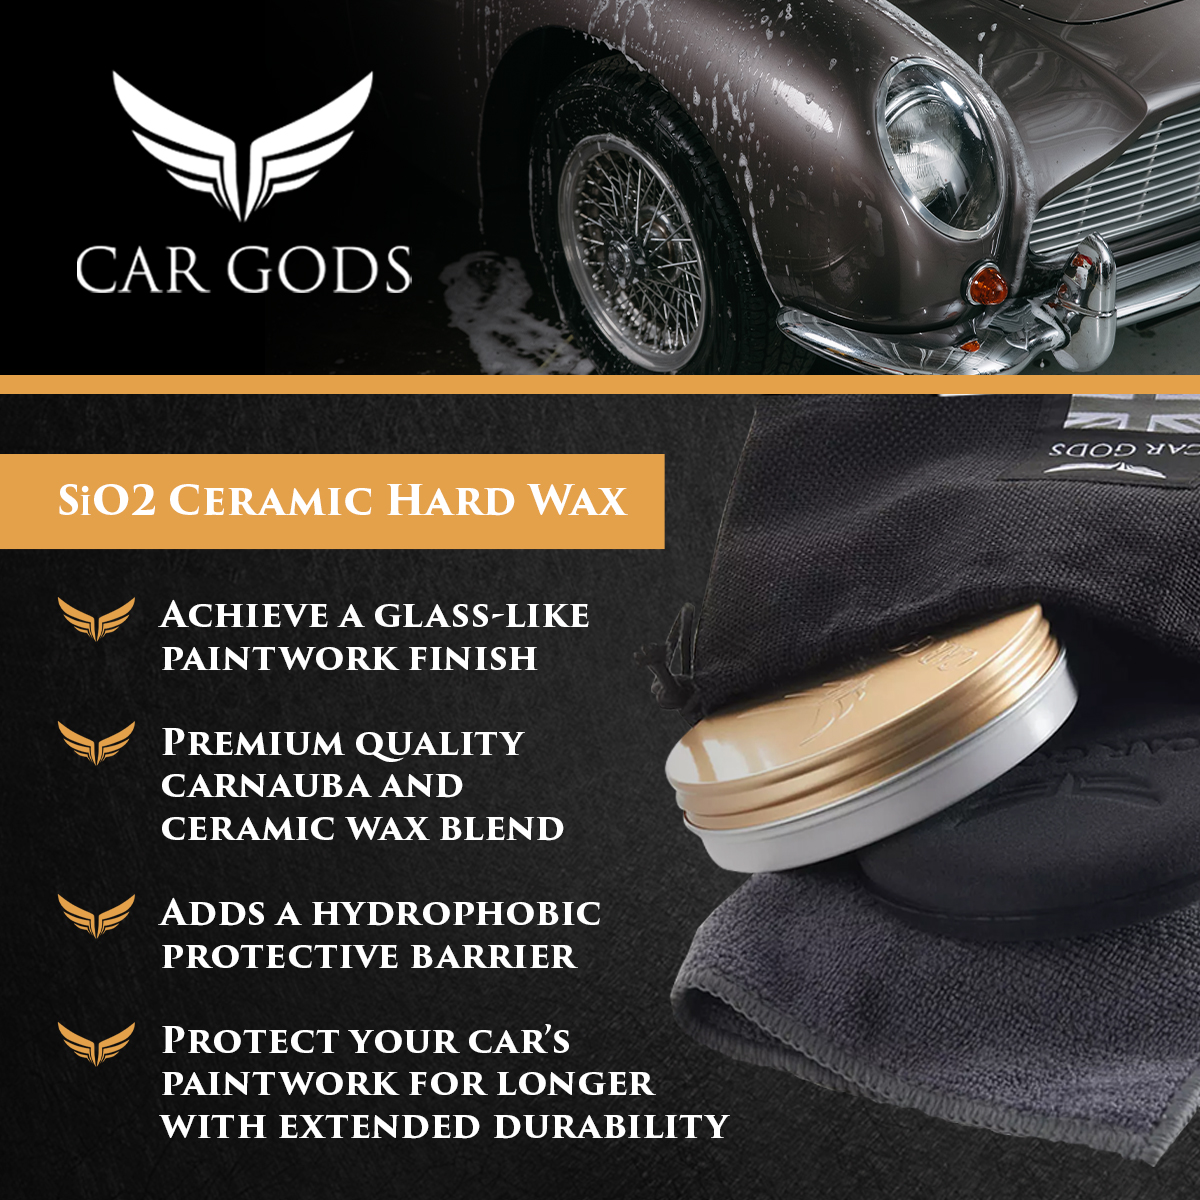 Car Gods SiO2 Ceramic Hard Wax. Protect car paintwork for longer with a hydrophobic protective barrier from a premium carnauba and ceramic wax blend.